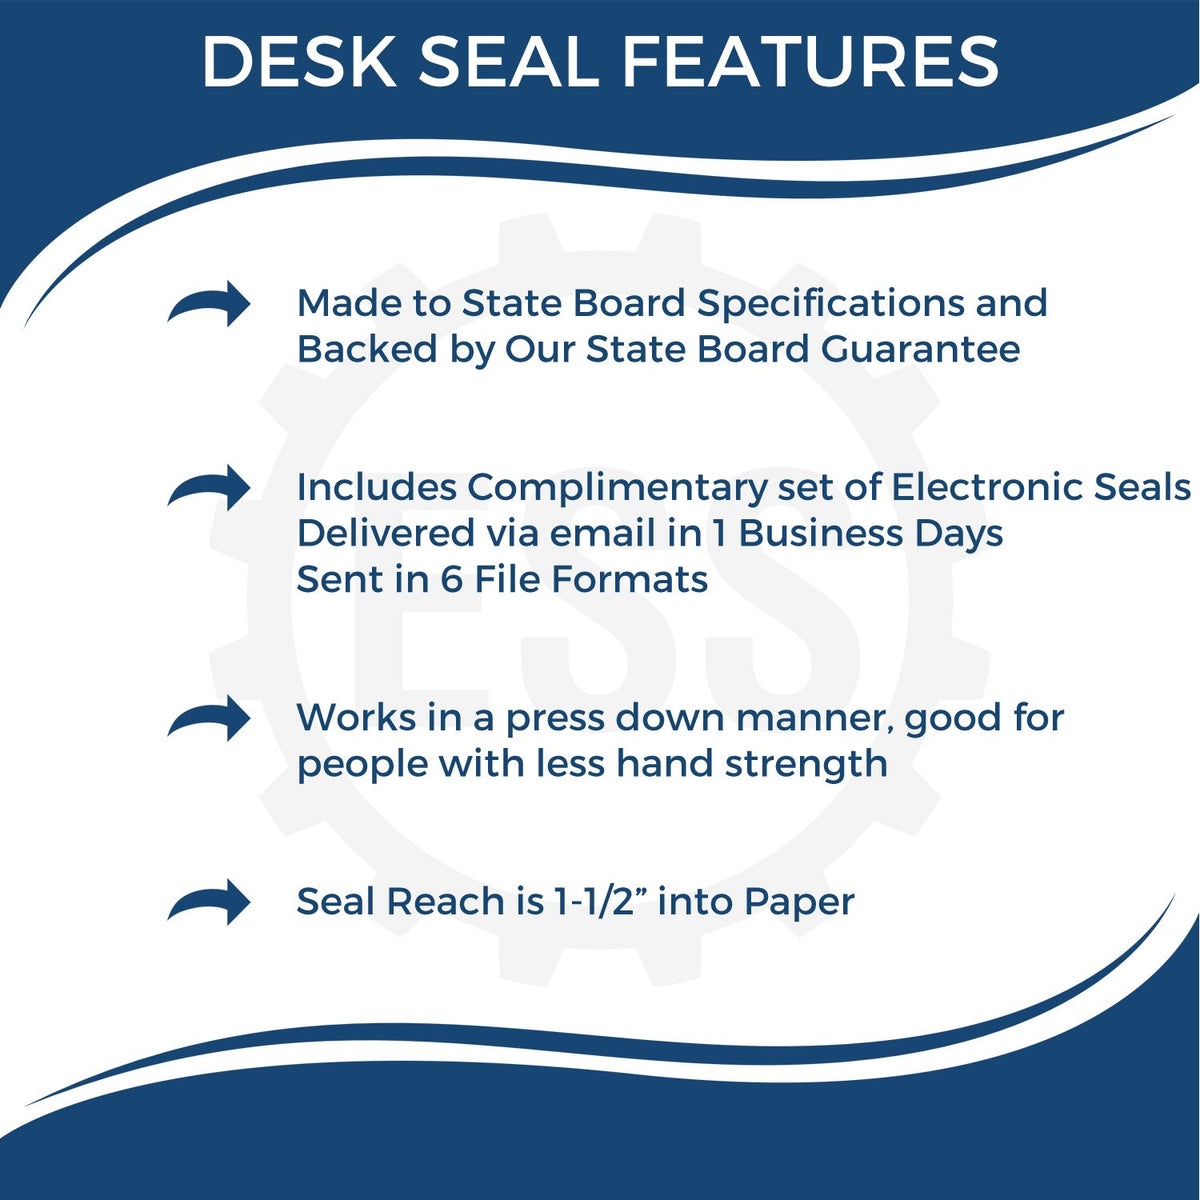 A picture of an infographic highlighting the selling points for the Mississippi Desk Architect Embossing Seal